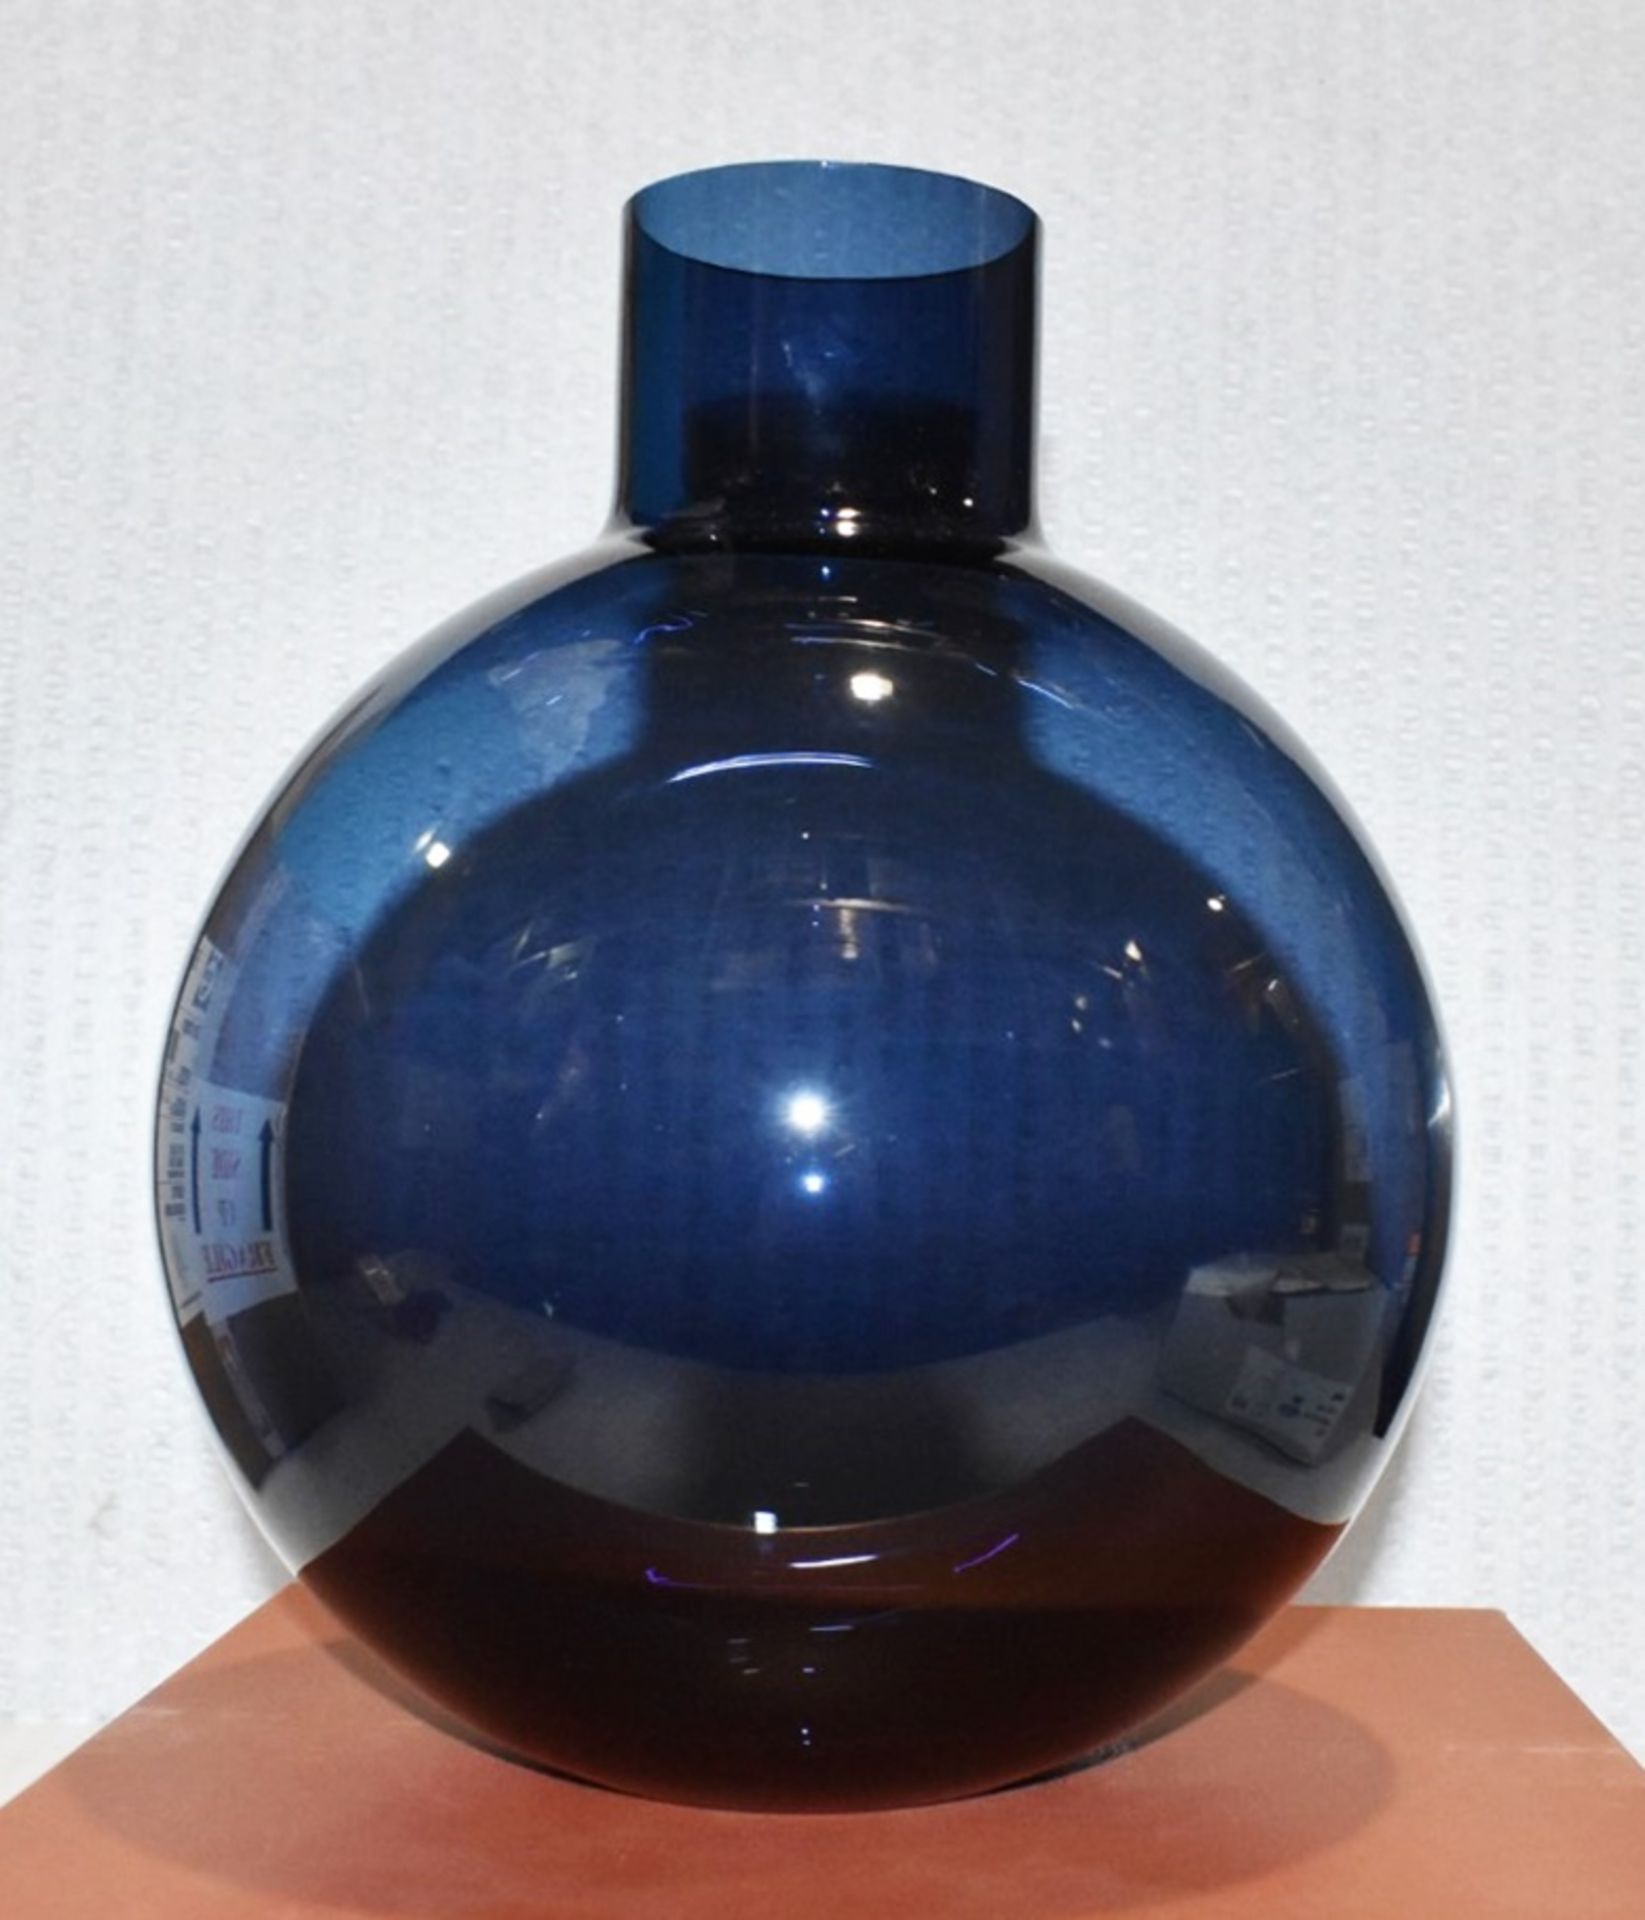 1 x POLTRONA FRAU 'Pallo Pot' High Quality Blown Glass Vase in Midnight Blue - RRP £1,080 *Signed* - Image 2 of 7